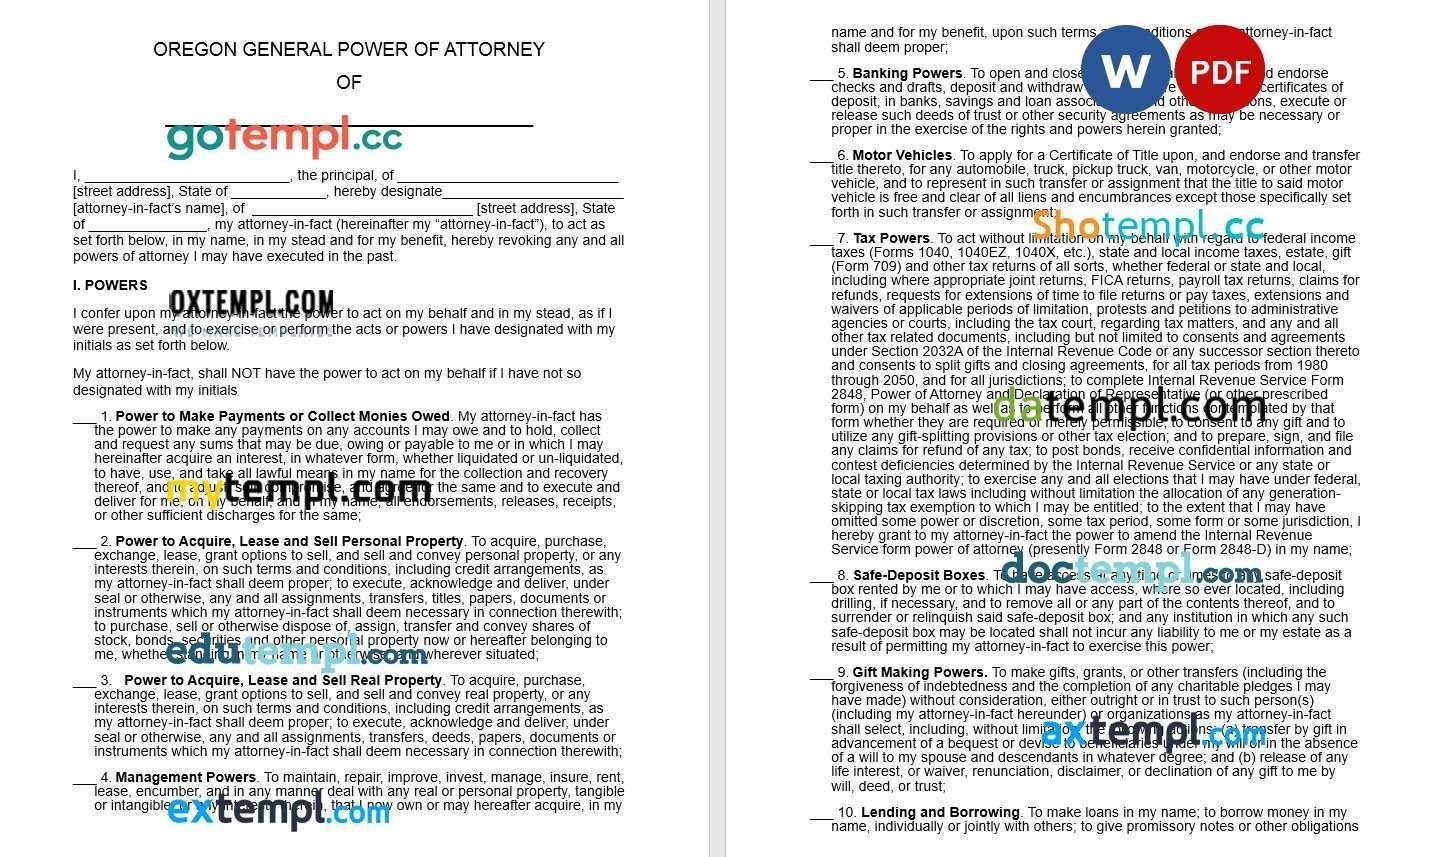 Kentucky Power of Attorney Revocation Form example, fully editable